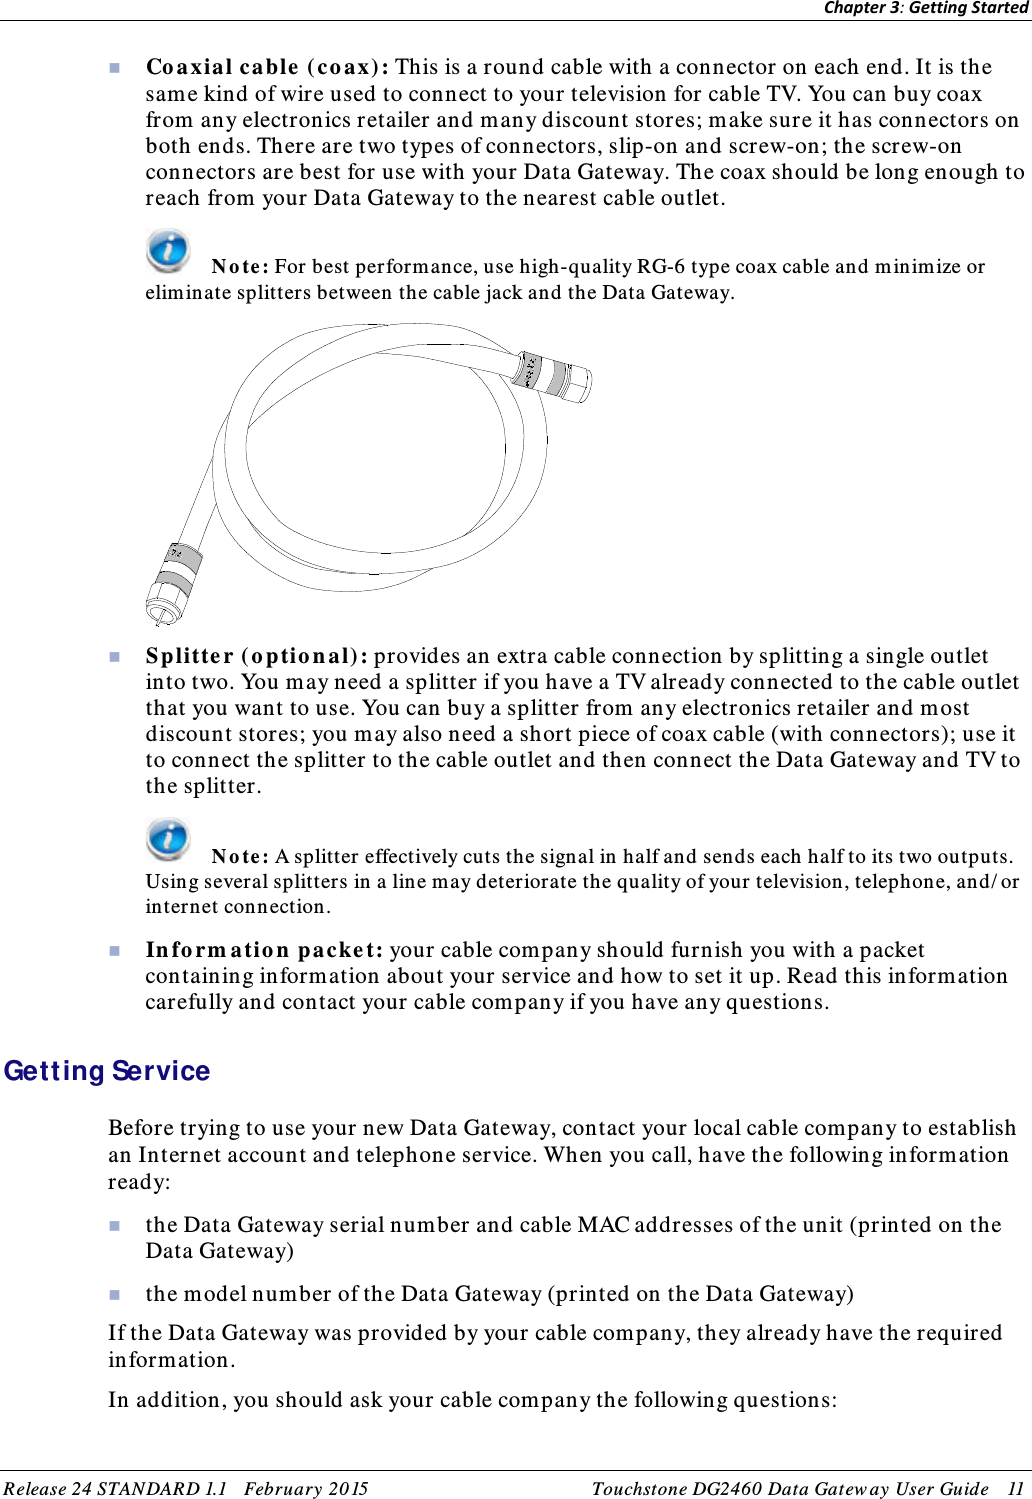 Chapter 3: Getting Started   Coaxial cable (coax): This is a round cable with a connector on each end. It is the same kind of wire used to connect to your television for cable TV. You can buy coax from any electronics retailer and many discount stores; make sure it has connectors on both ends. There are two types of connectors, slip-on and screw-on; the screw-on connectors are best for use with your Data Gateway. The coax should be long enough to reach from your Data Gateway to the nearest cable outlet.  Note: For best performance, use high-quality RG-6 type coax cable and minimize or eliminate splitters between the cable jack and the Data Gateway.   Splitter (optional): provides an extra cable connection by splitting a single outlet into two. You may need a splitter if you have a TV already connected to the cable outlet that you want to use. You can buy a splitter from any electronics retailer and most discount stores; you may also need a short piece of coax cable (with connectors); use it to connect the splitter to the cable outlet and then connect the Data Gateway and TV to the splitter.  Note: A splitter effectively cuts the signal in half and sends each half to its two outputs. Using several splitters in a line may deteriorate the quality of your television, telephone, and/or internet connection.  Information packet: your cable company should furnish you with a packet containing information about your service and how to set it up. Read this information carefully and contact your cable company if you have any questions.   Getting Service Before trying to use your new Data Gateway, contact your local cable company to establish an Internet account and telephone service. When you call, have the following information ready:  the Data Gateway serial number and cable MAC addresses of the unit (printed on the Data Gateway)  the model number of the Data Gateway (printed on the Data Gateway) If the Data Gateway was provided by your cable company, they already have the required information. In addition, you should ask your cable company the following questions: Release 24 STANDARD 1.1    February 2015 Touchstone DG2460 Data Gateway User Guide    11  